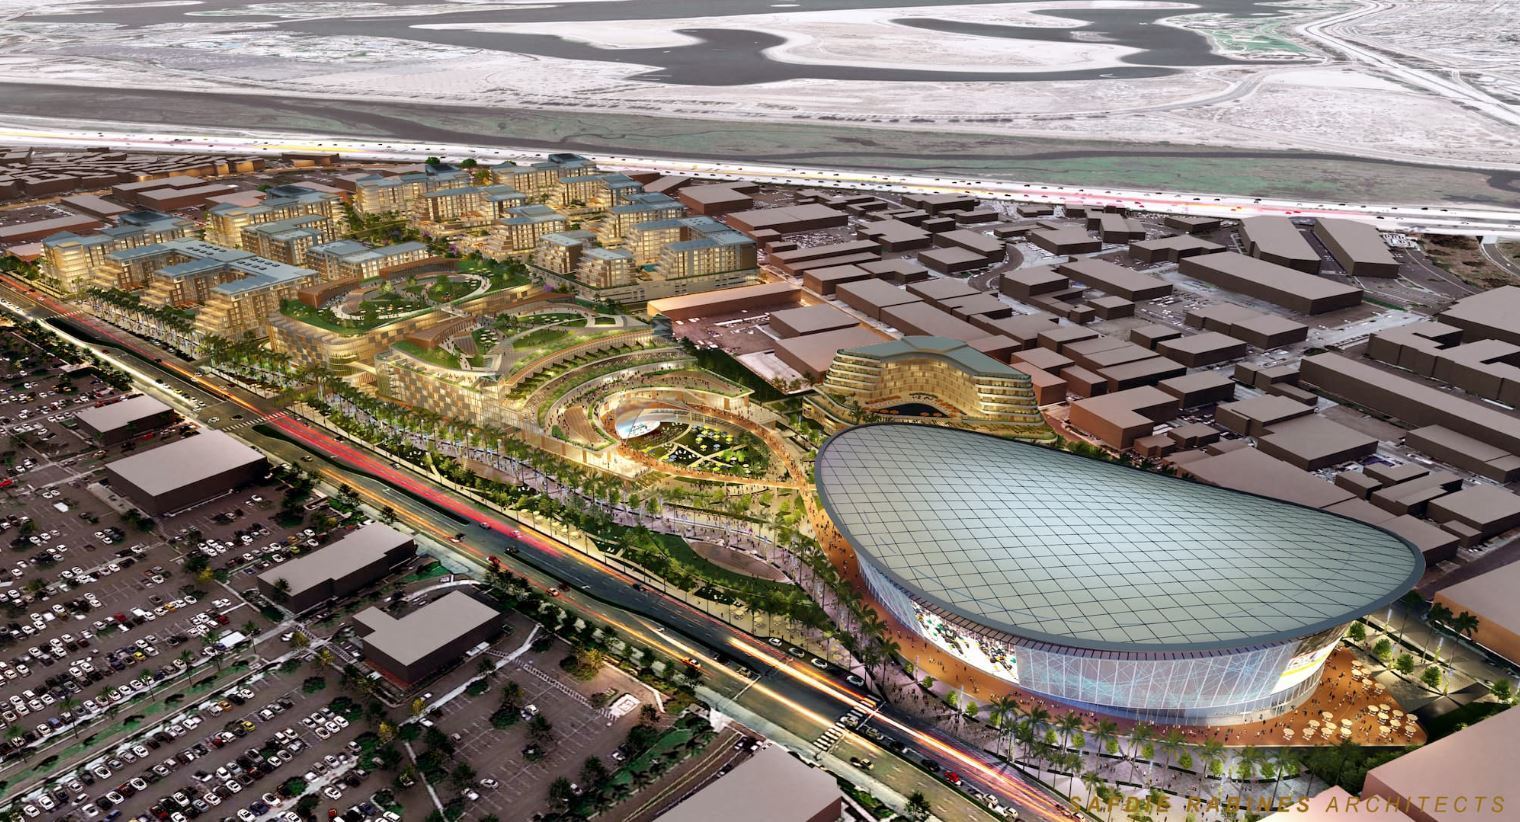 Plans for Midway Rising include replacing or renovating the aging San Diego Sports Arena and adding more than 4,000 apartments, along with retail and hotel components. (Midway Rising/Safdie Rabines Architects)